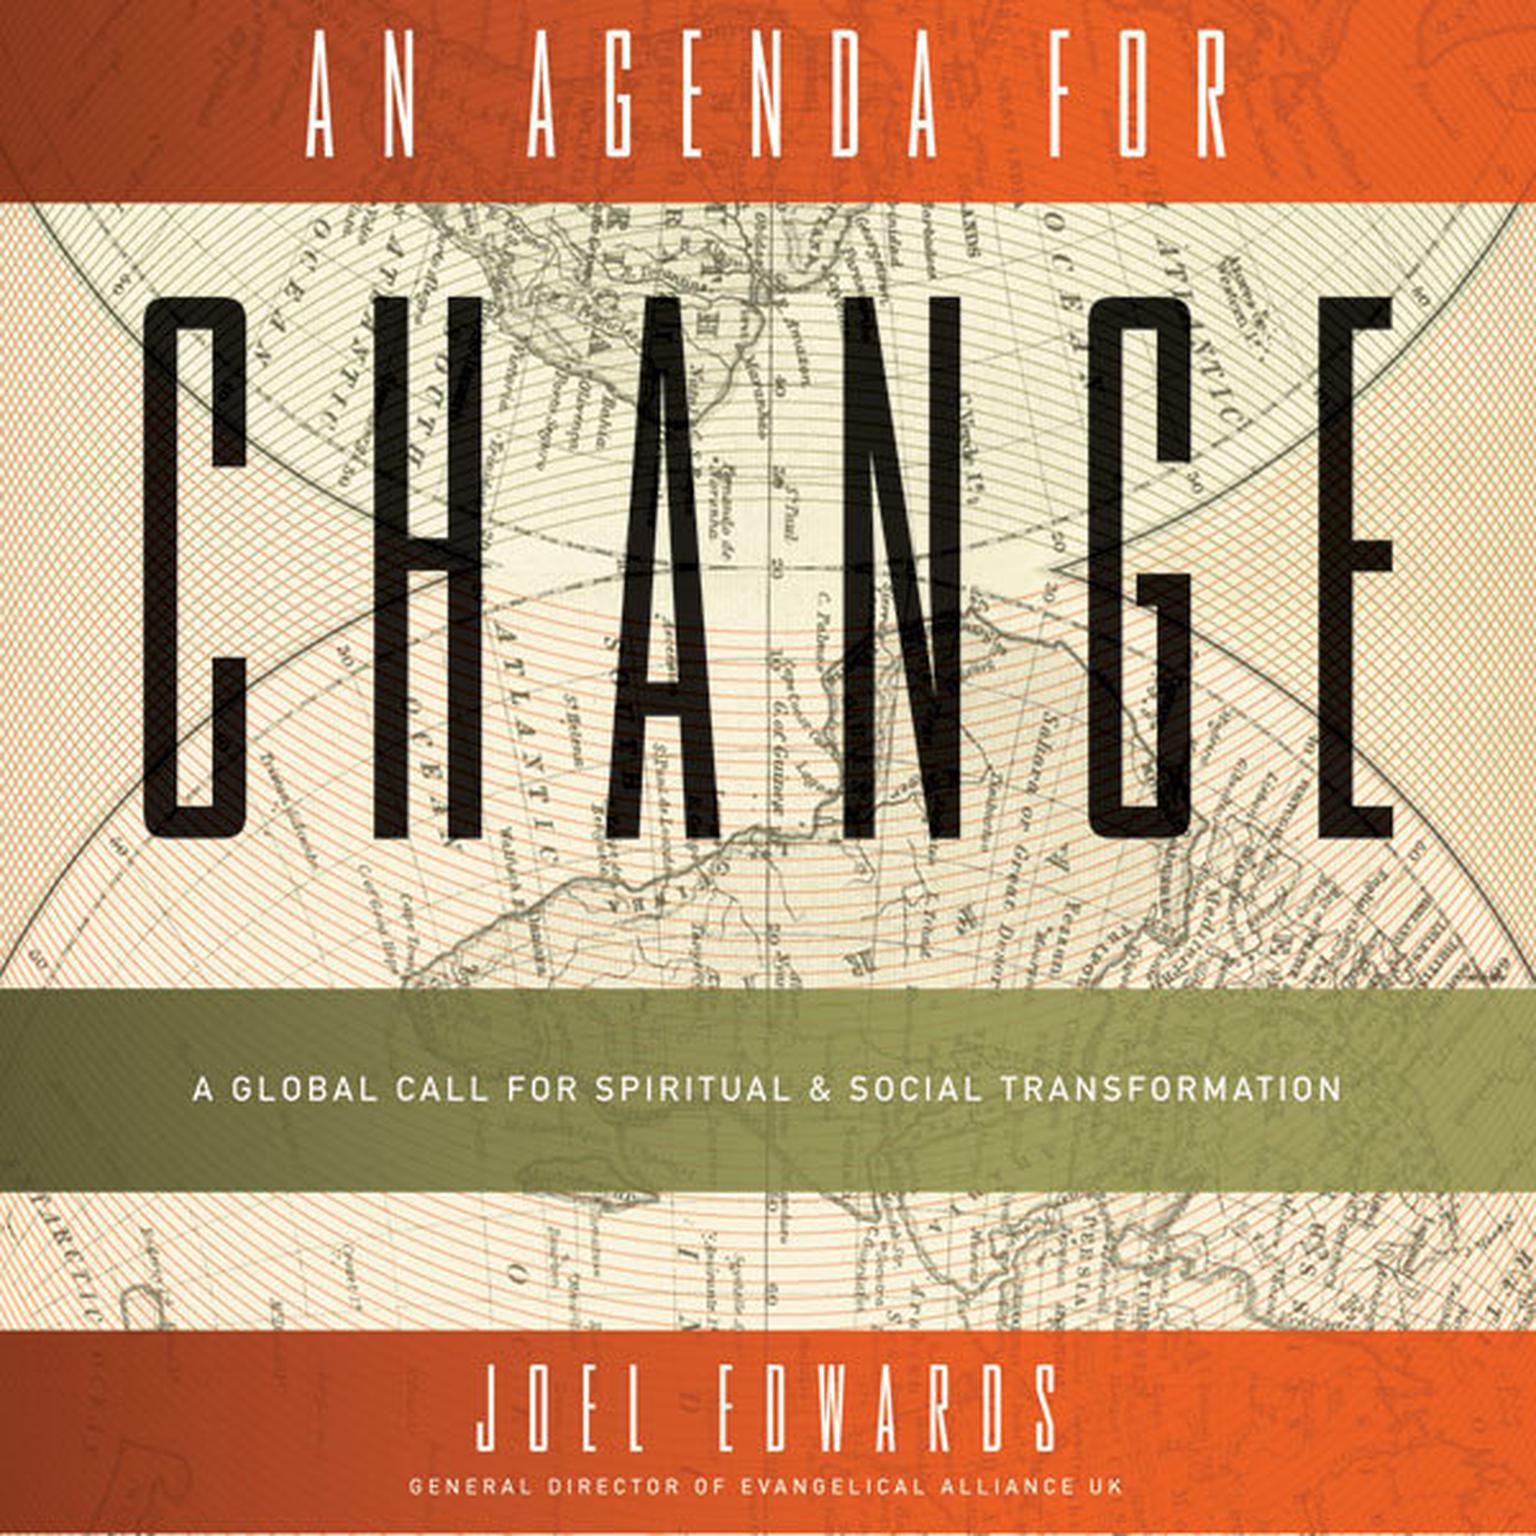 An Agenda for Change: A Global Call for Spiritual and Social Transformation Audiobook, by Joel Edwards